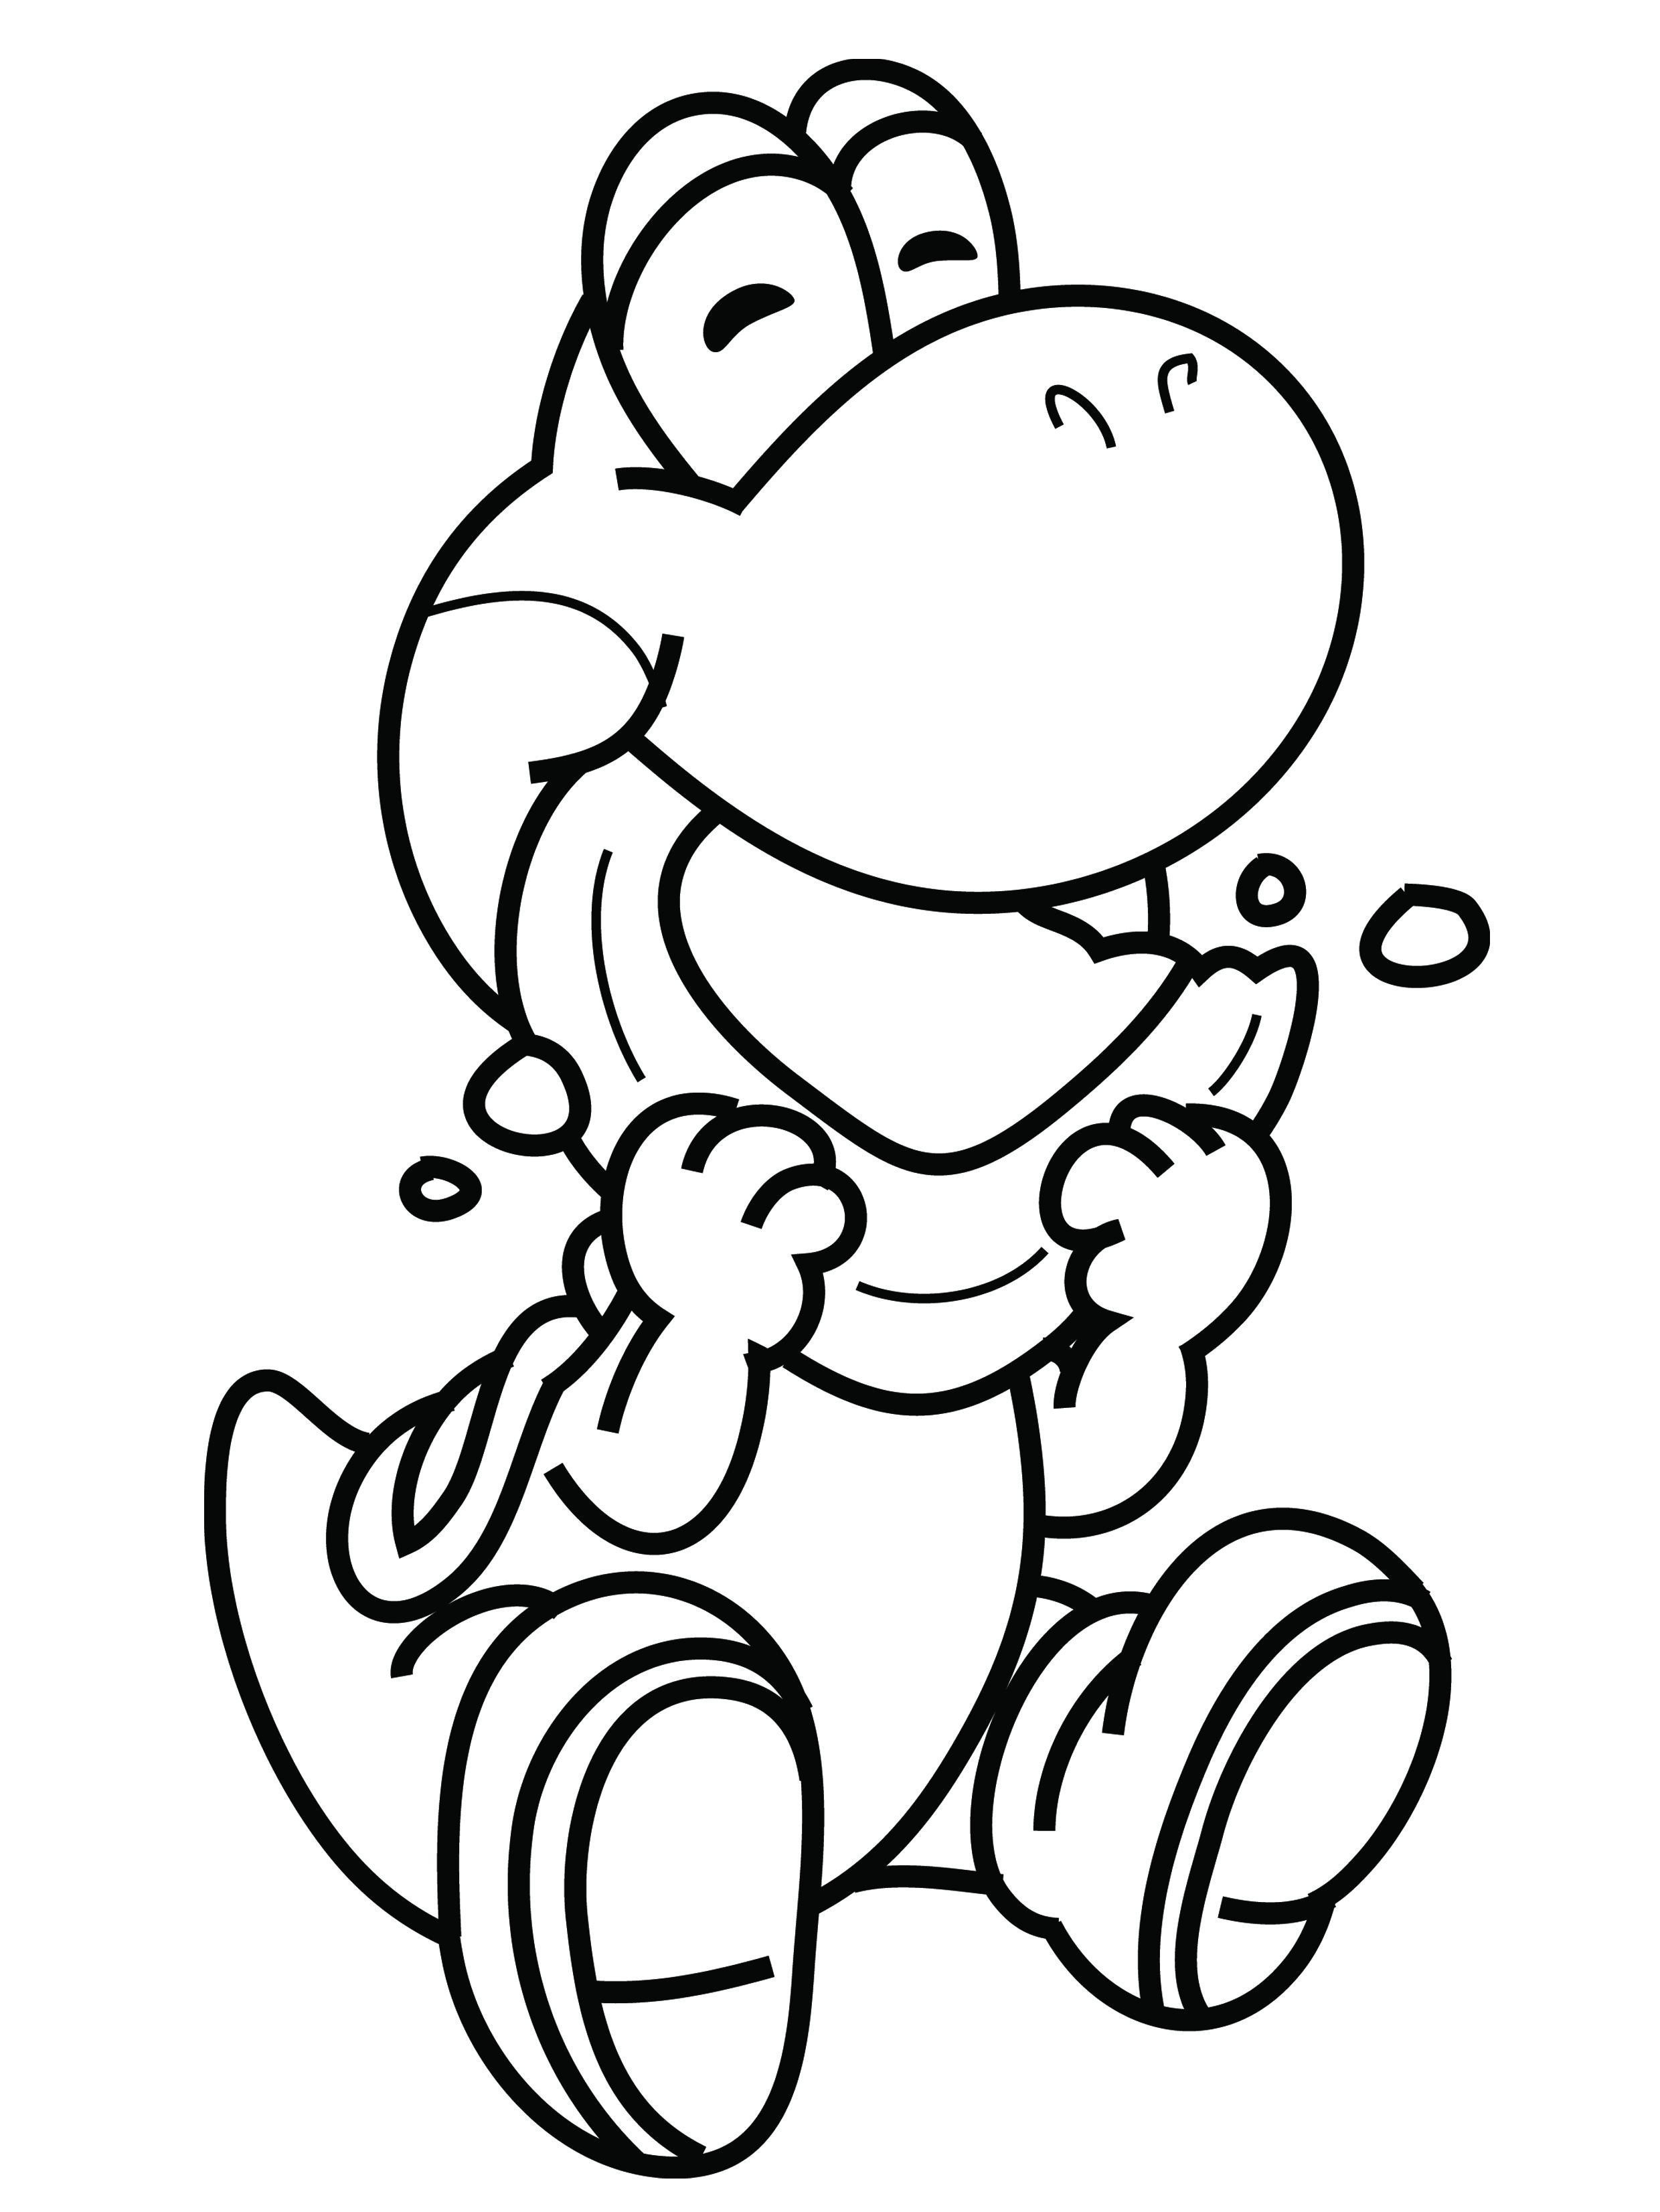 Yoshi Coloring Pages To Print Coloring Page Ba Yoshi Coloring Page Free Printable Coloring